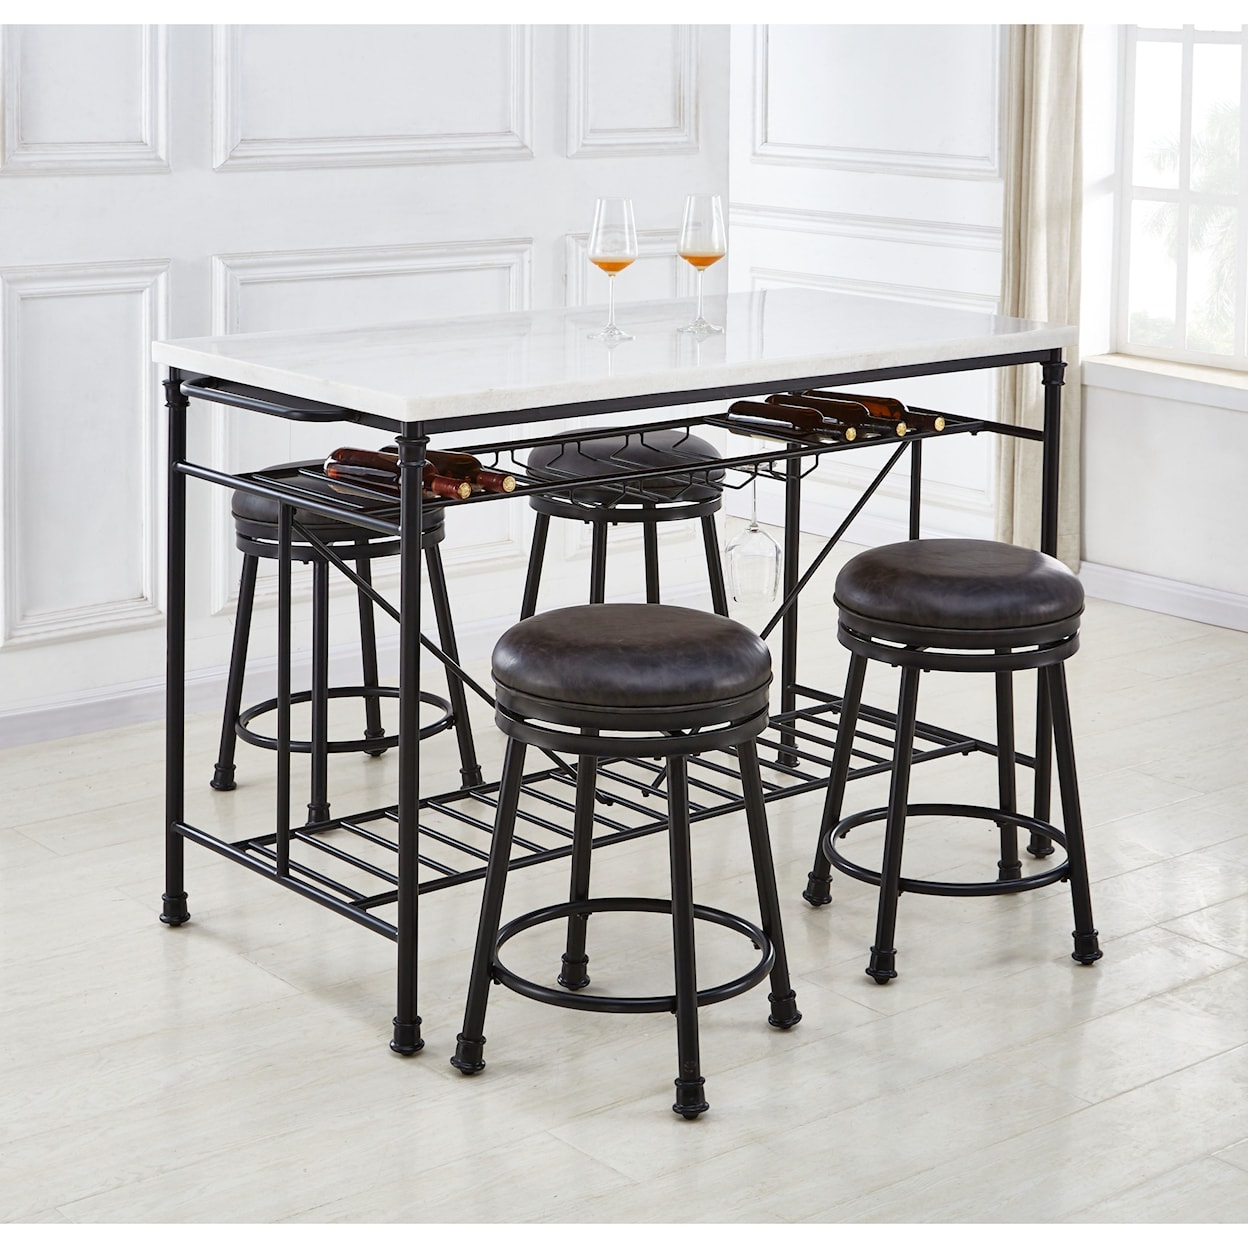 Steve Silver Claire 5-Piece Kitchen Island and Stool Set